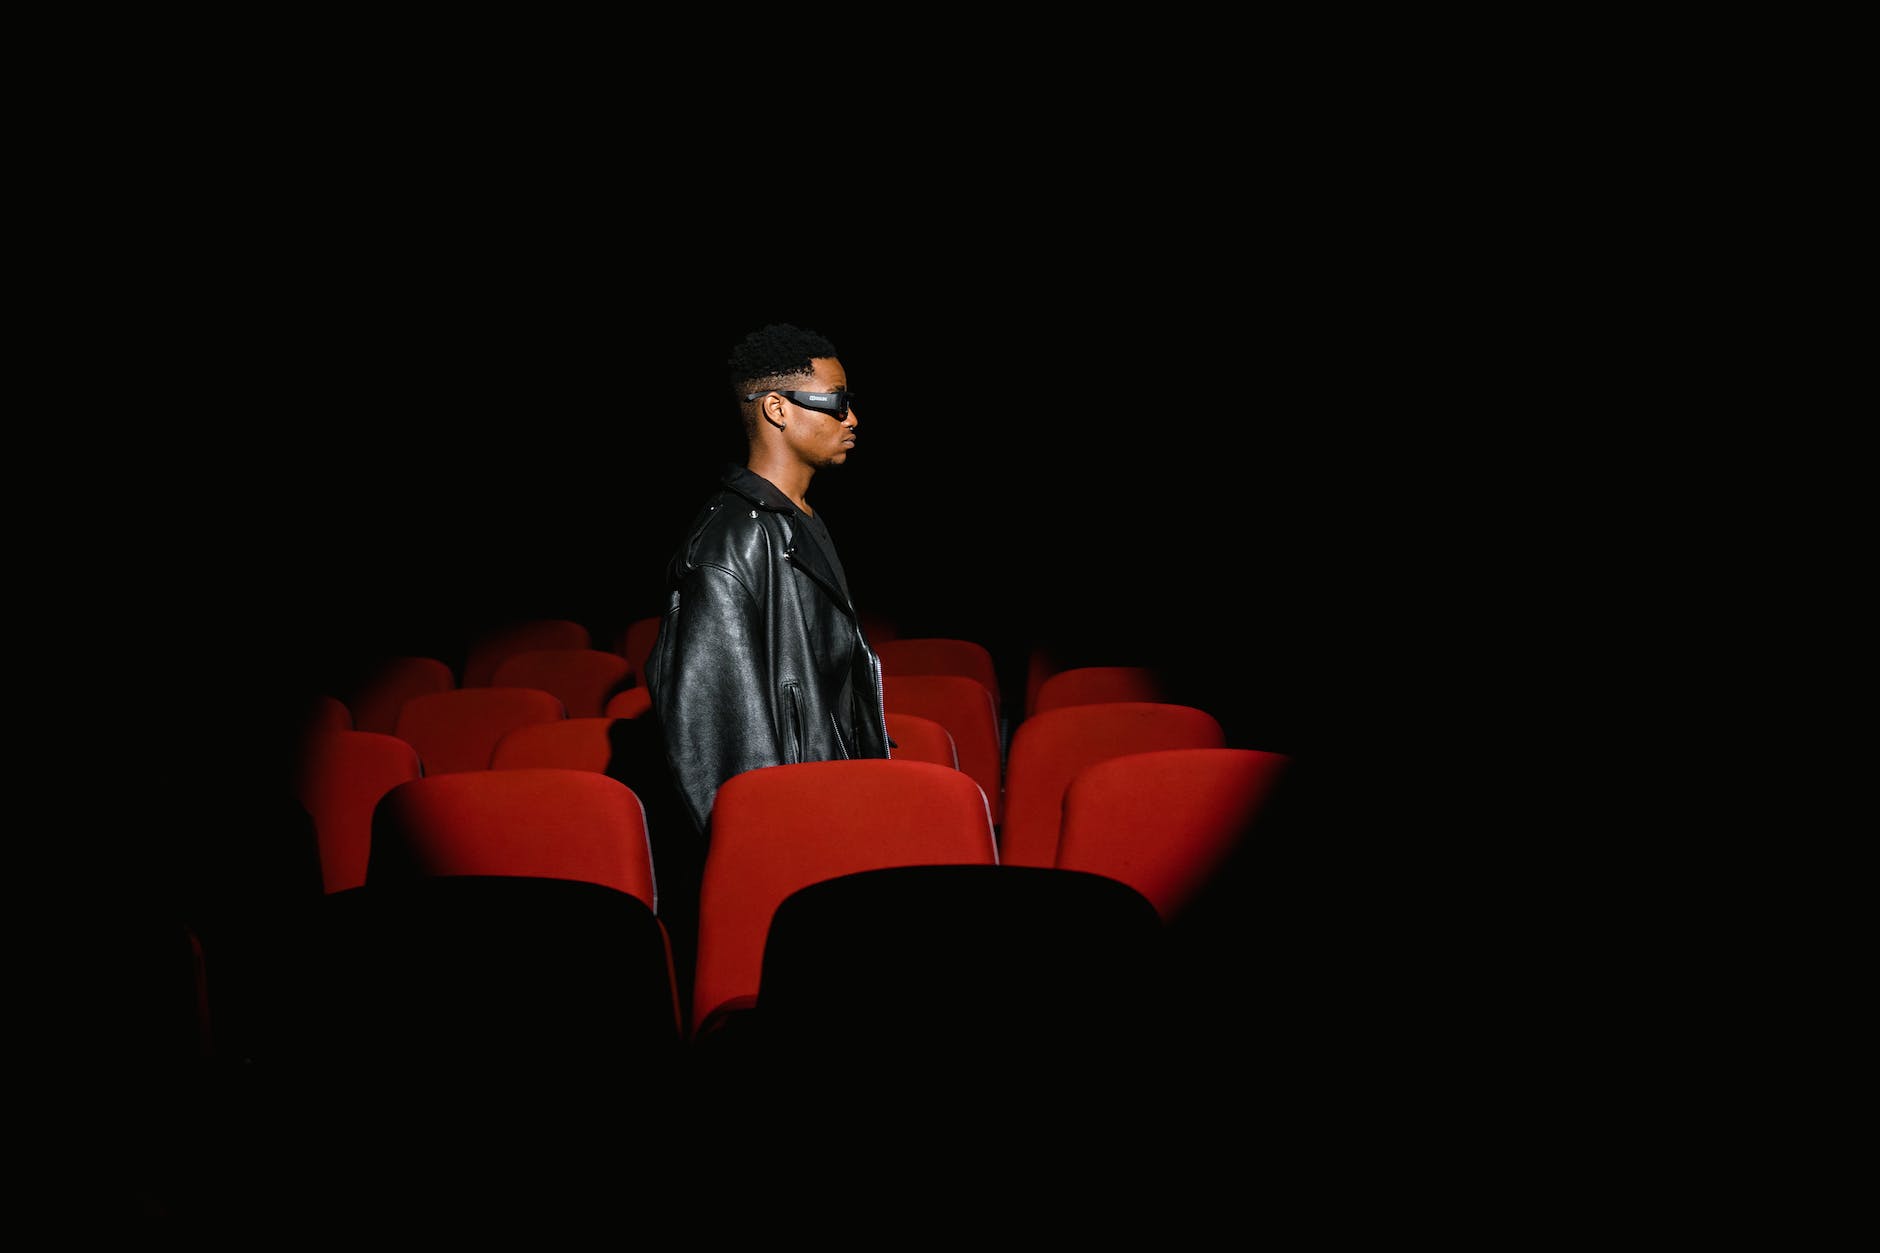 man black leather jacket standing behind red theatre seat